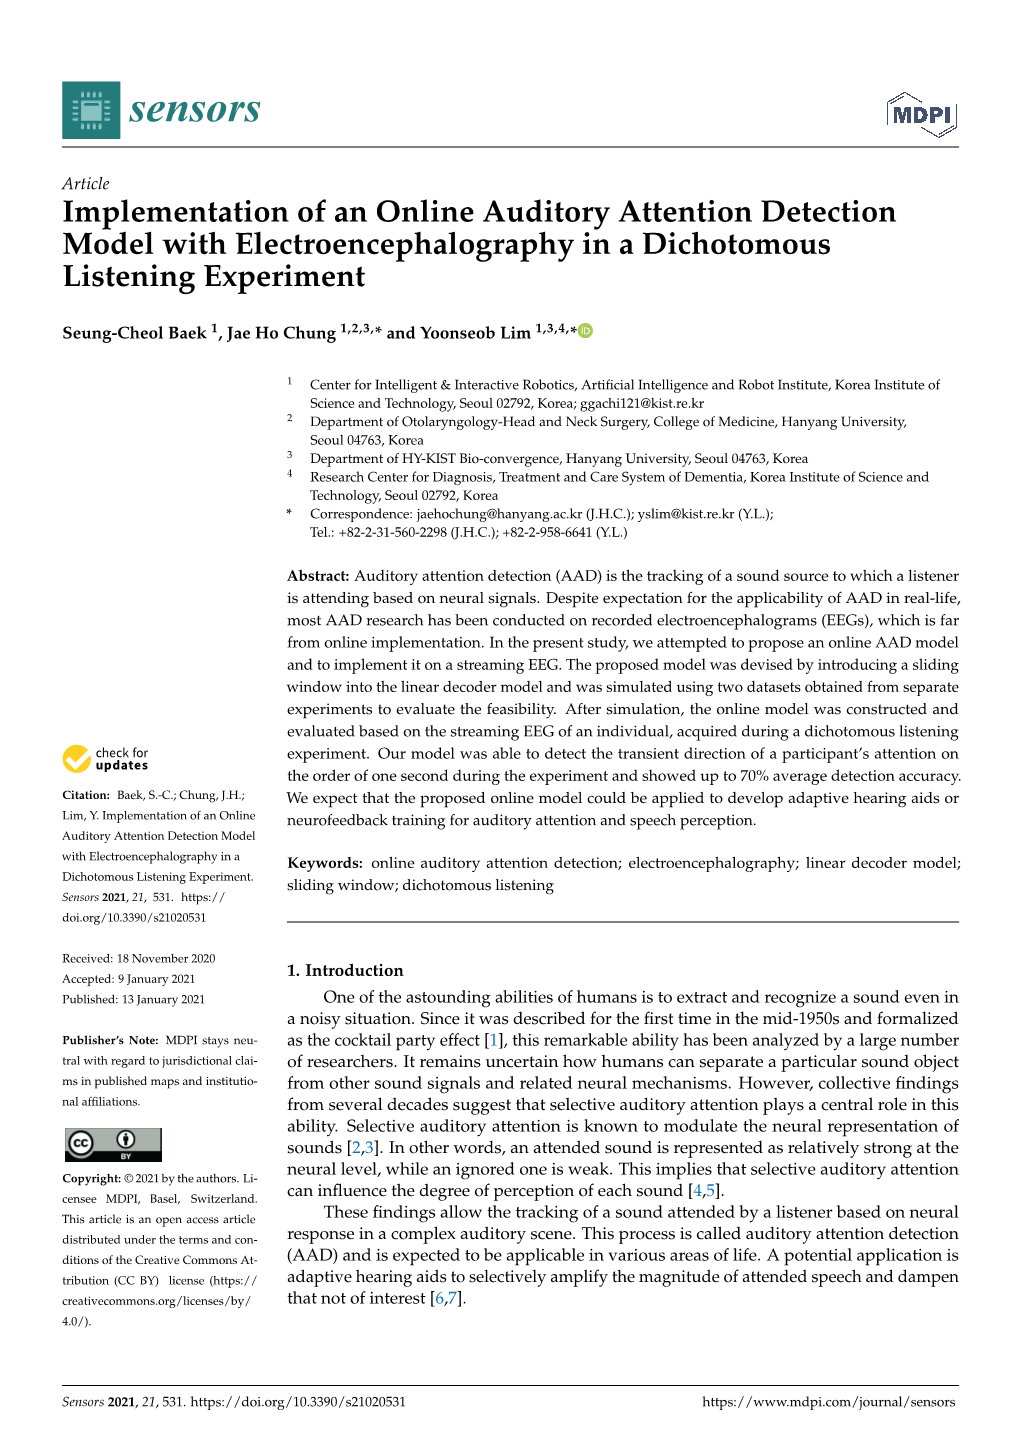 Implementation of an Online Auditory Attention Detection Model with Electroencephalography in a Dichotomous Listening Experiment